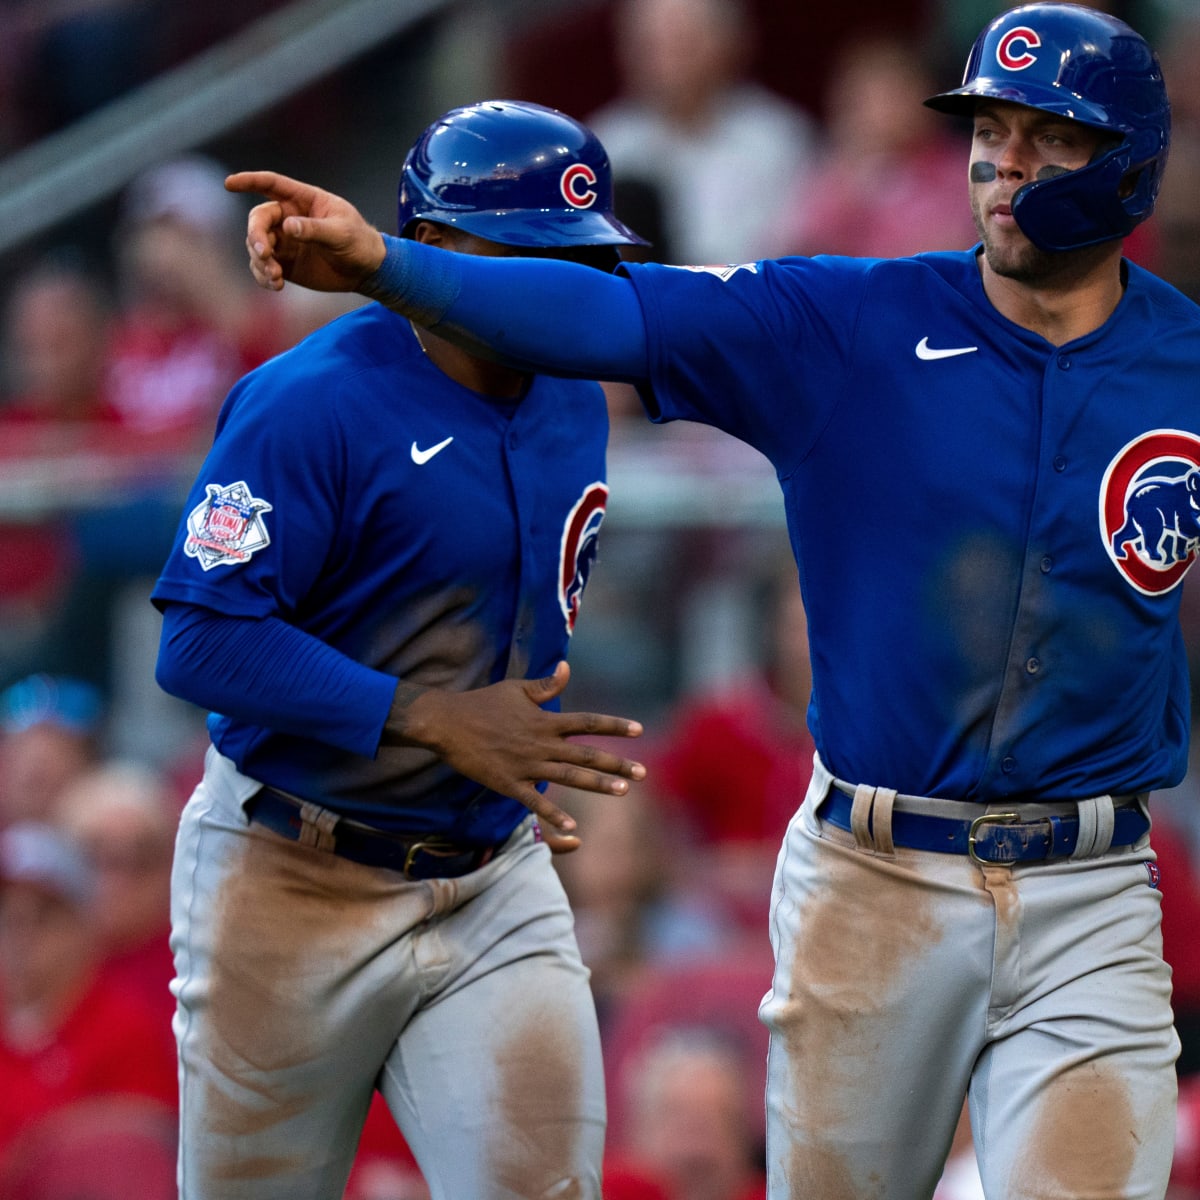 2023 Cubs player profiles: Nico Hoerner, the face at second base